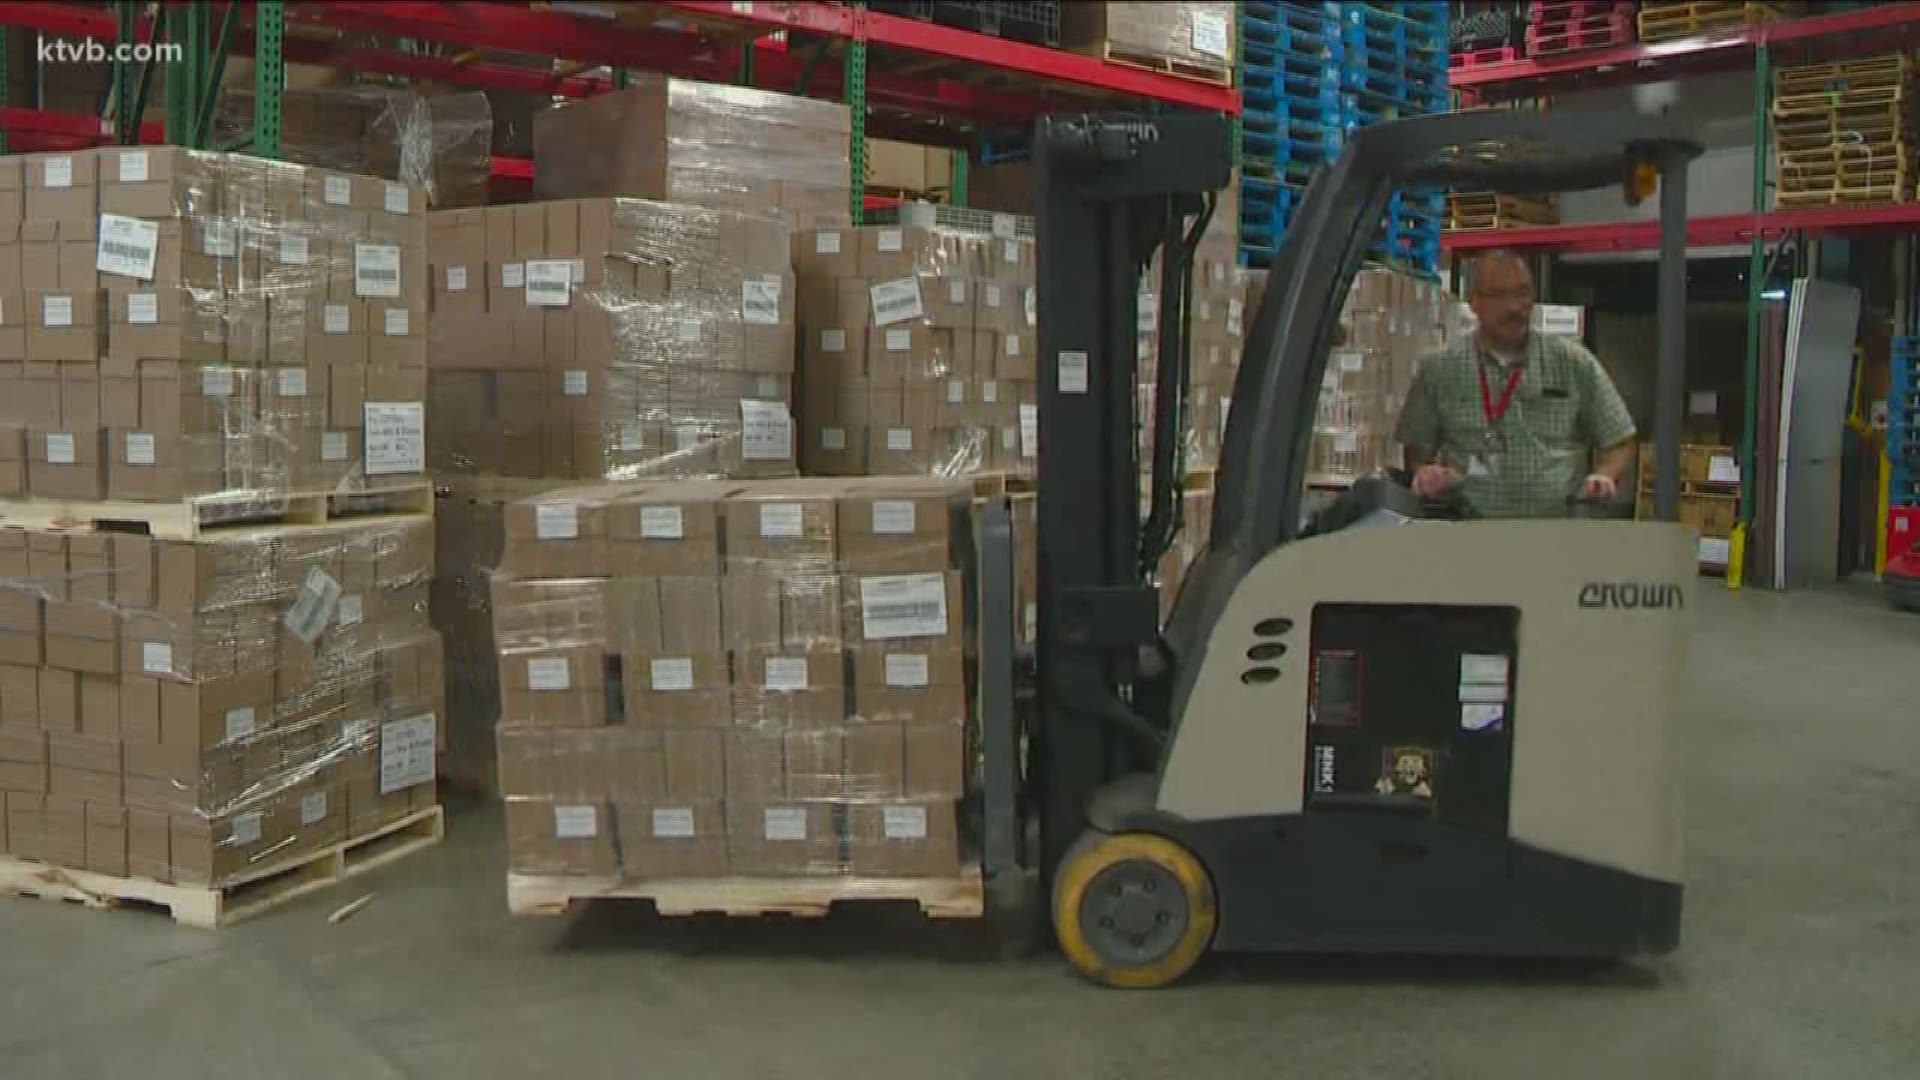 The Idaho Foodbank says there are over 220,000 people in the state struggling with food insecurity.